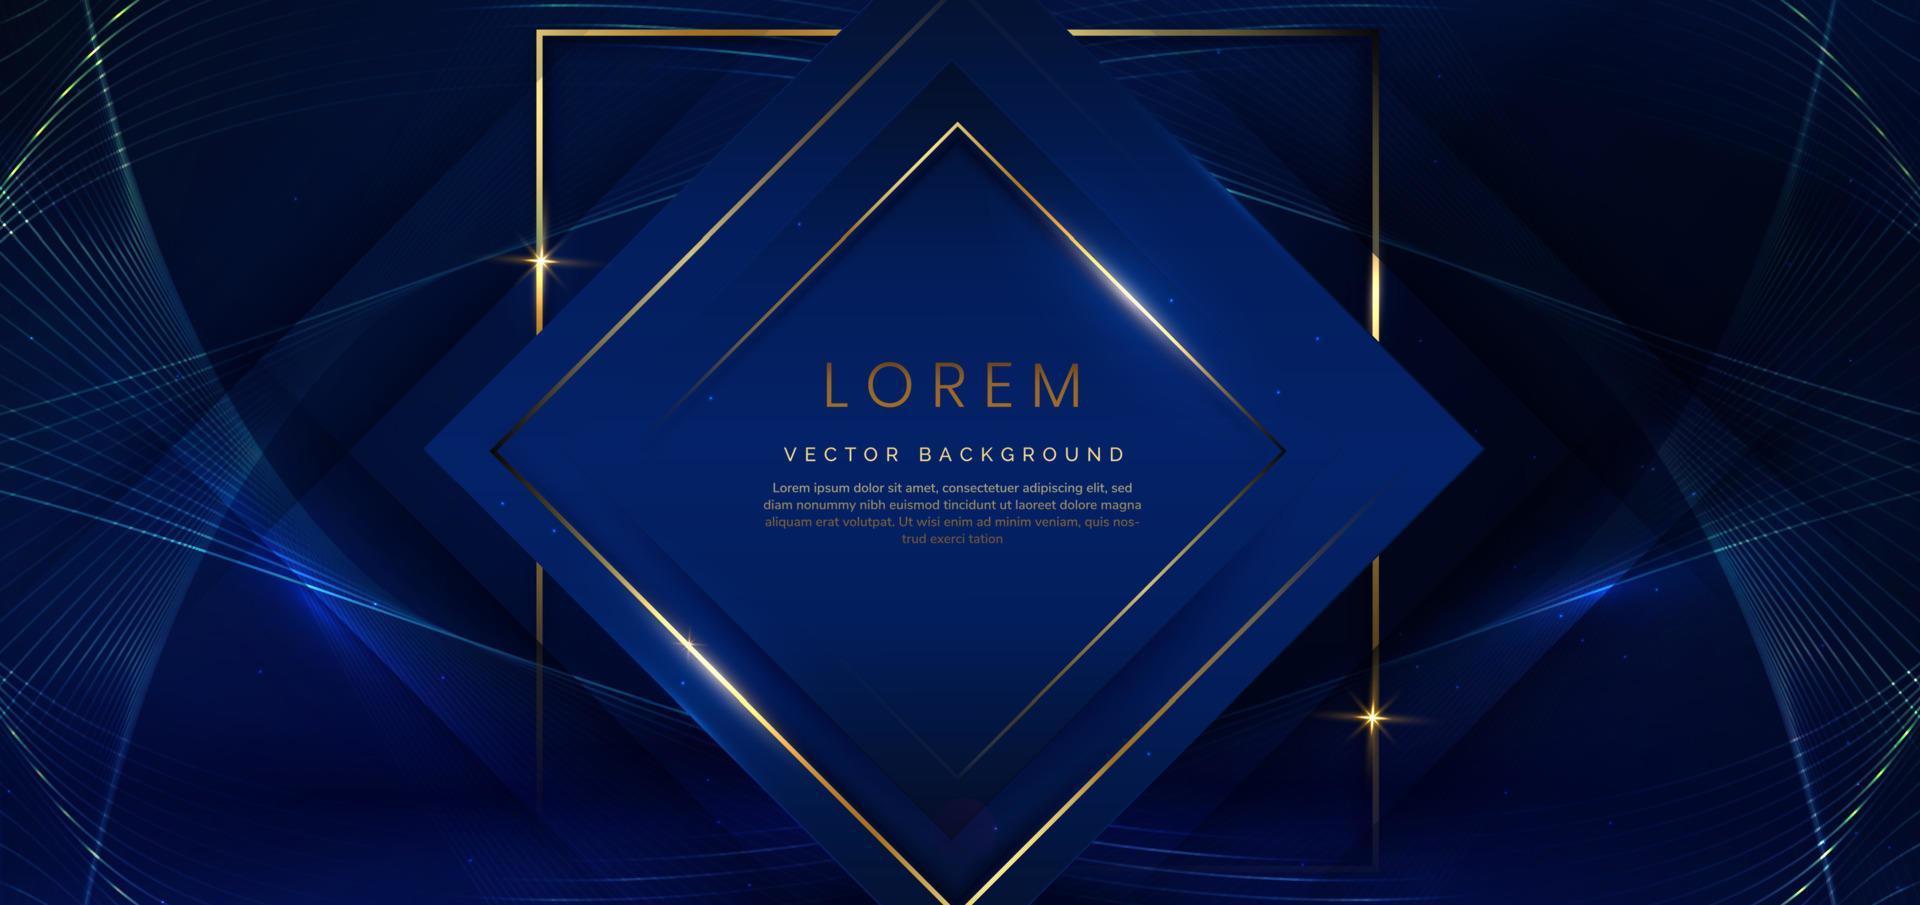 3D square frame dark blue on dark blue background with lighting effect and sparkling with copy space for text. Luxury design style. Vector illustration